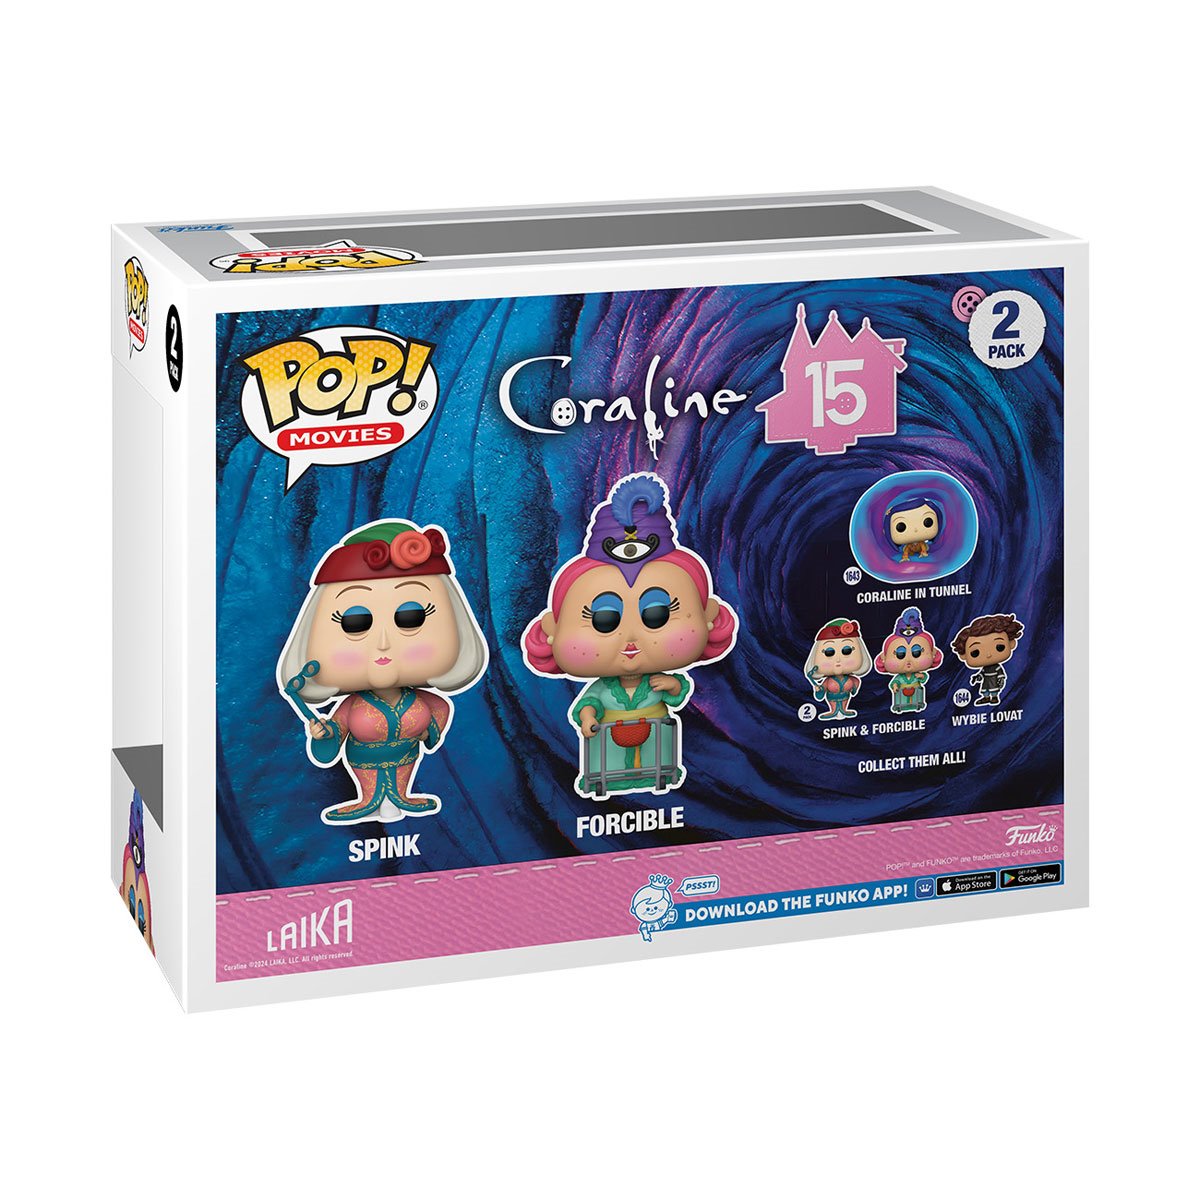 Coraline 15th Anniversary Spink and Forcible Funko Pop! Vinyl Figure 2-Pack Funko